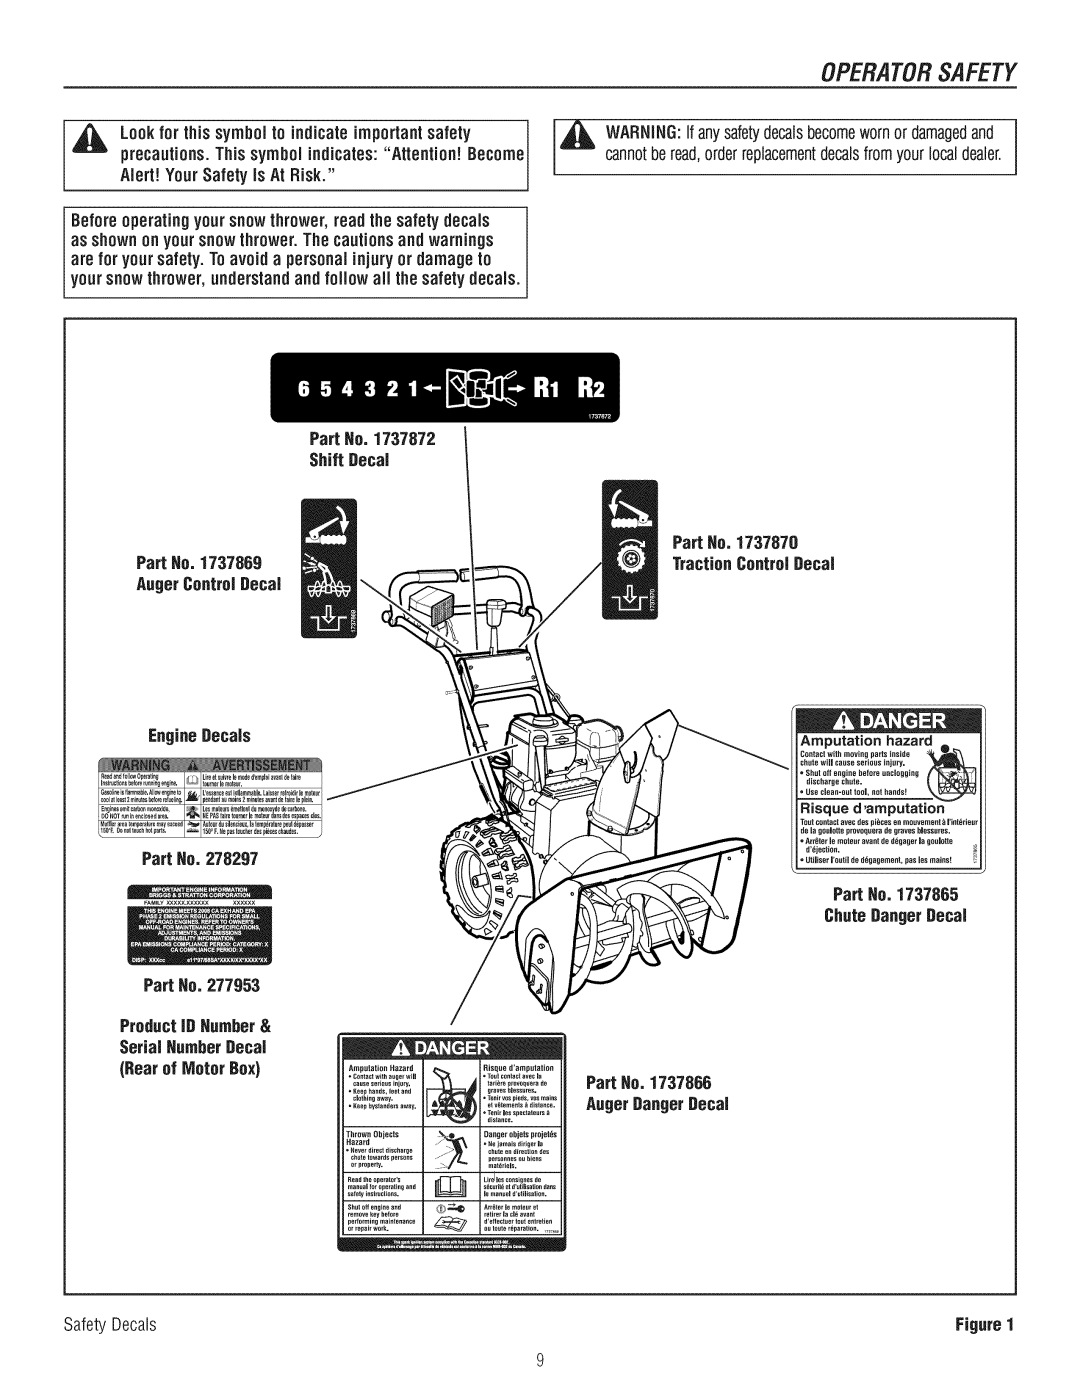 Craftsman C950-52943-0 Operatorsafety, Auger ControlDecal EngineDecals Part Ho, Shift Decal, TractionControl Decal 